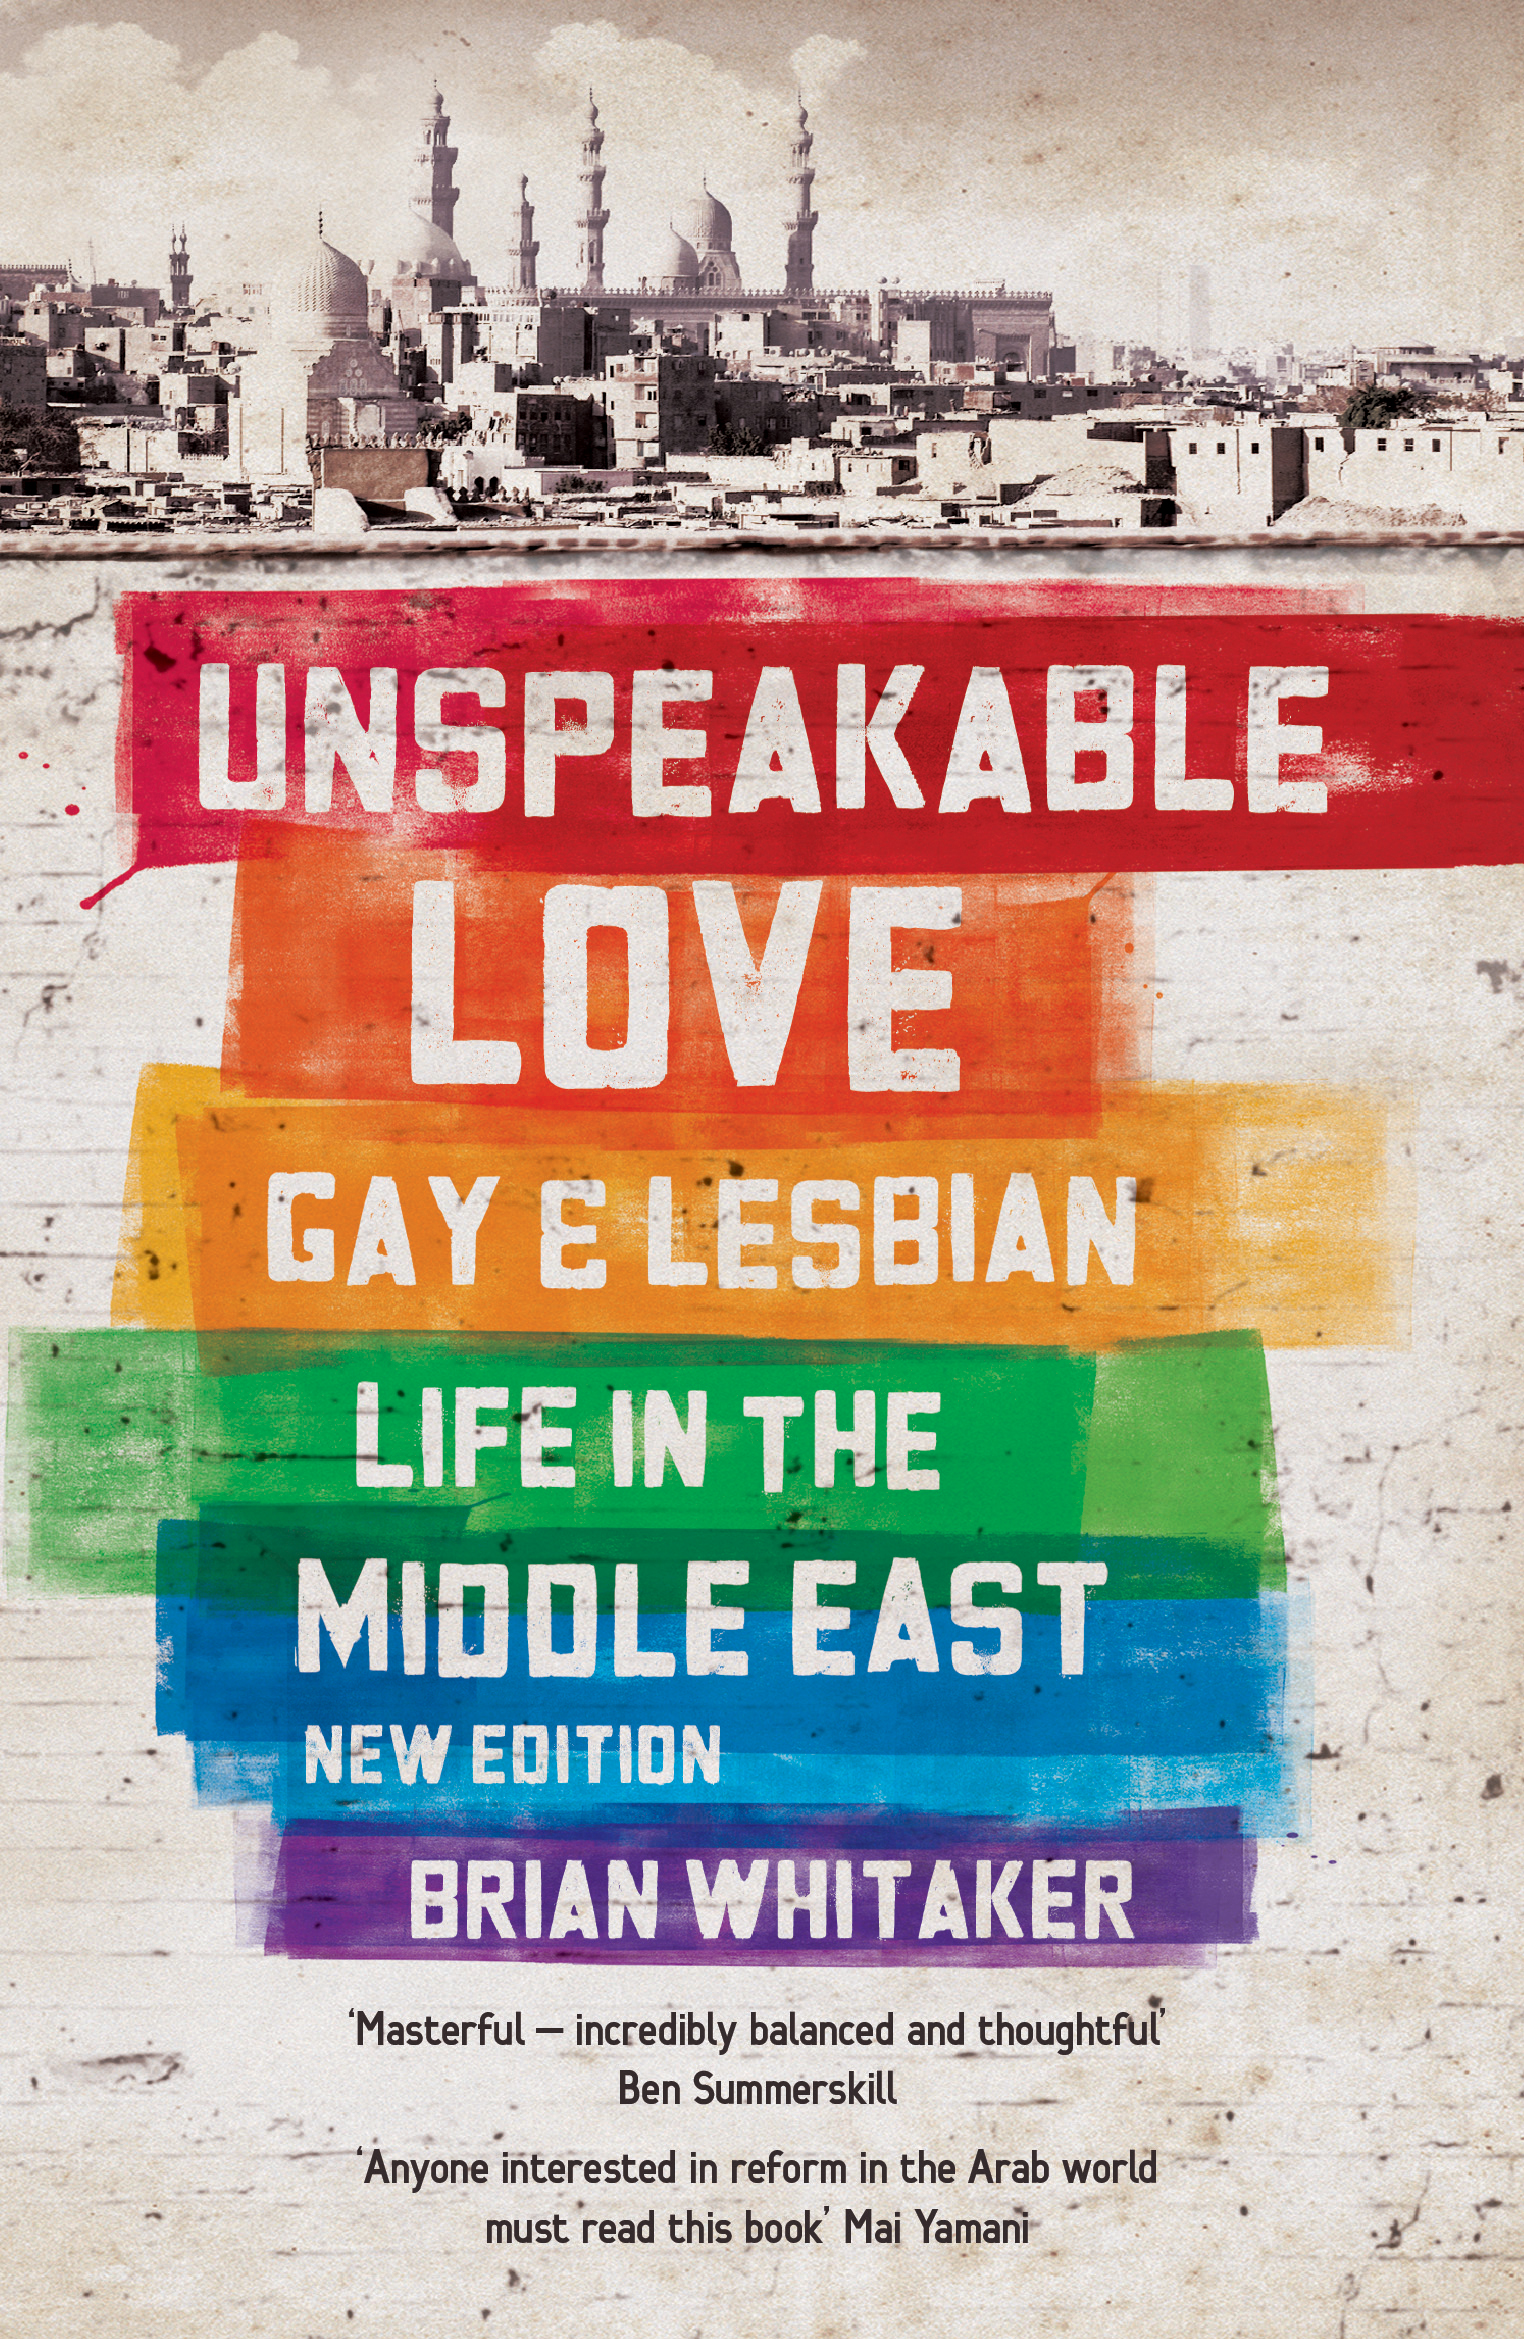 Unspeakable Love – Gay and Lesbian Life in the Middle East